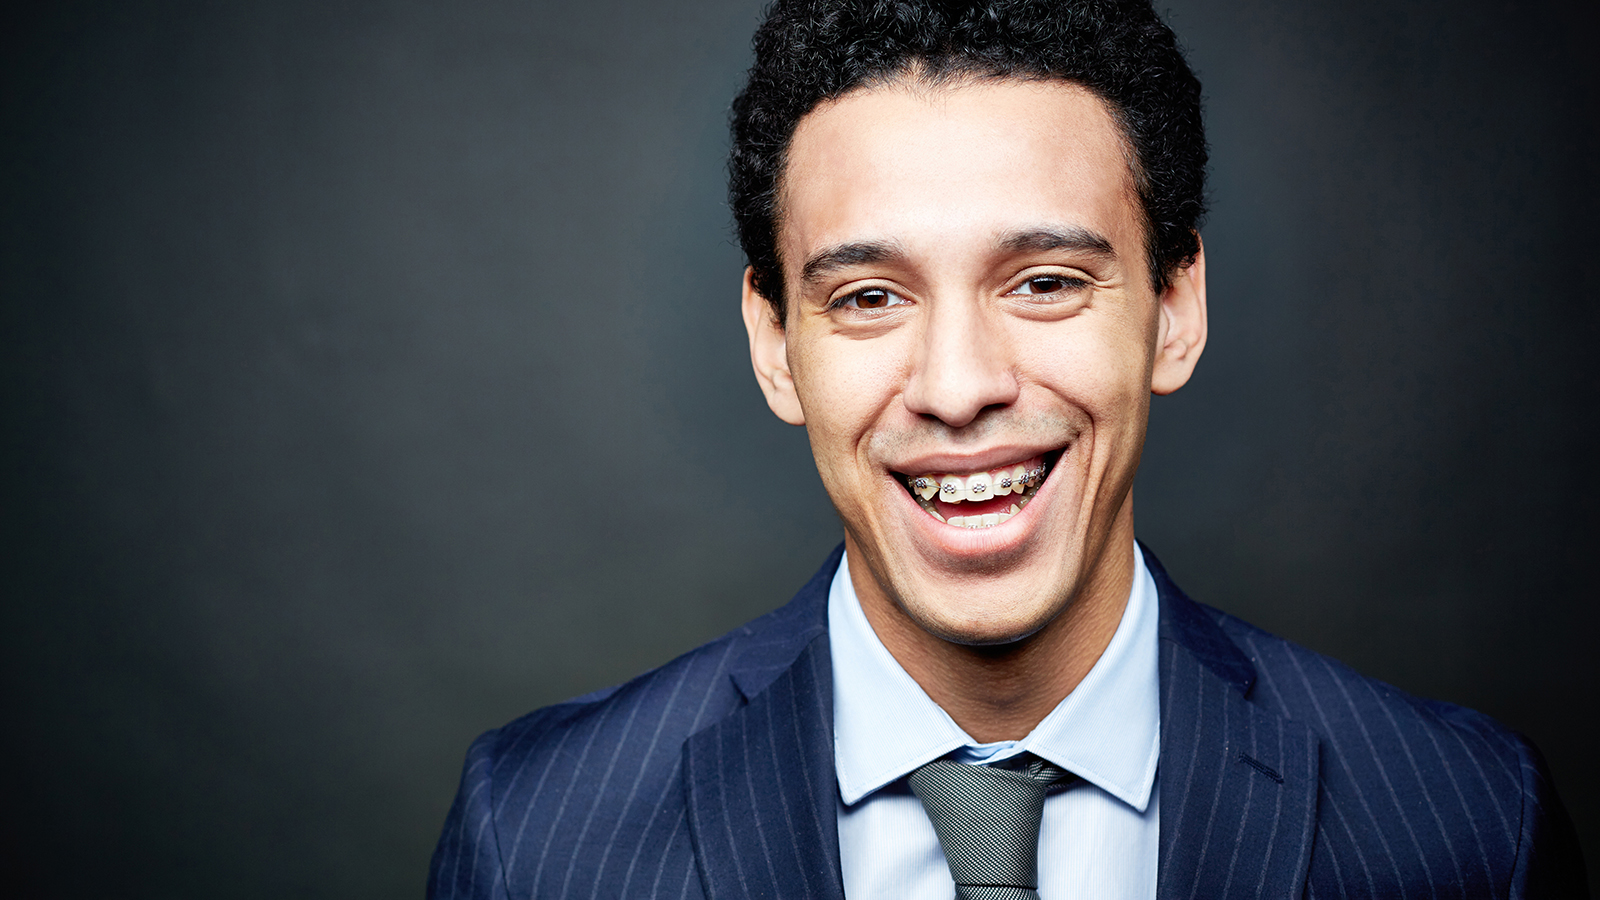 Portrait of a businessman wearing braces and smiling confidently